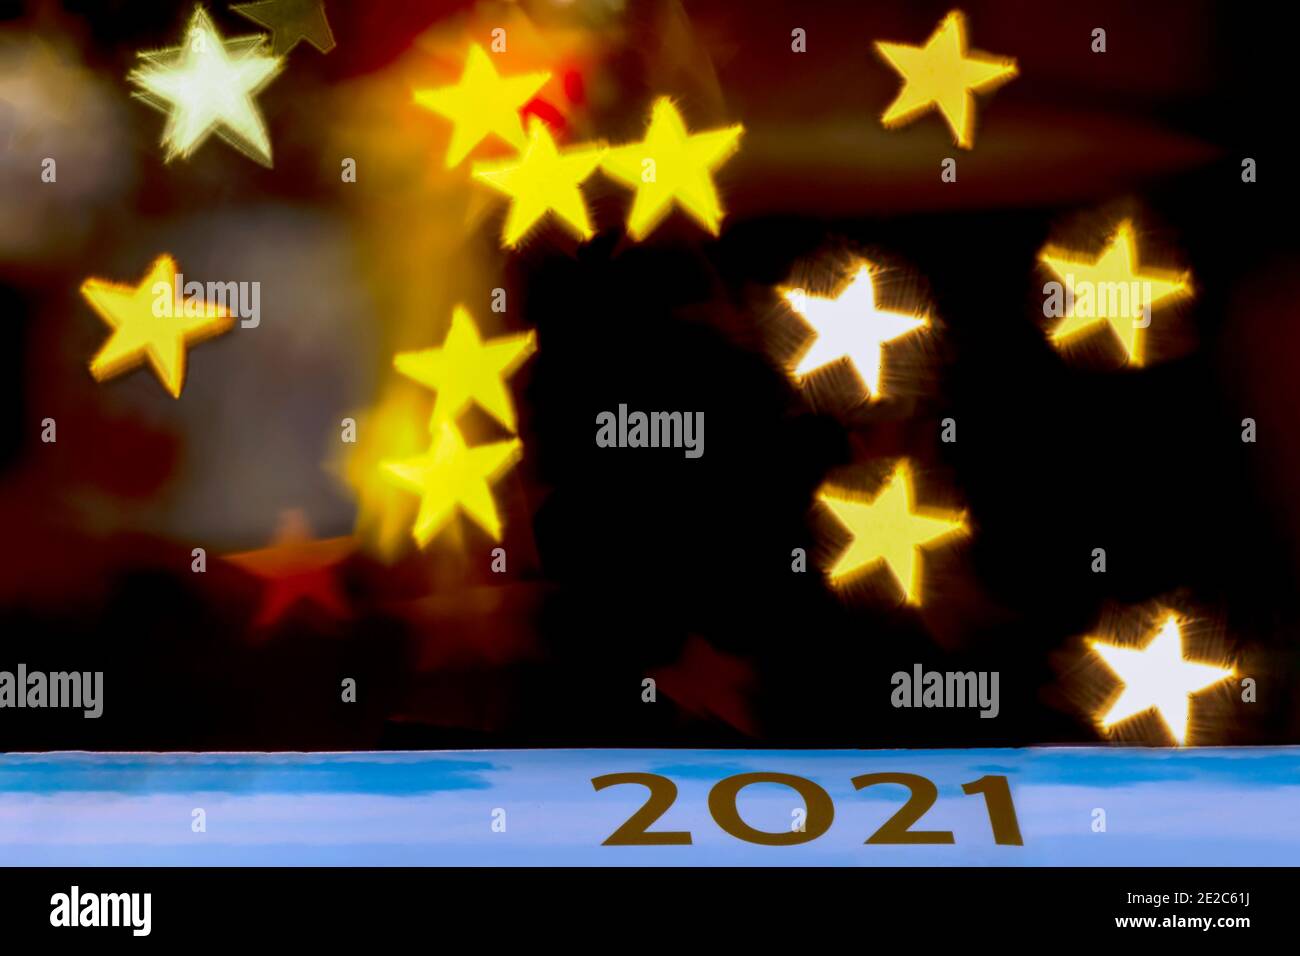 The golden inscription 2021 on a celestial background against a dark background with bokeh of star-shaped lights Stock Photo